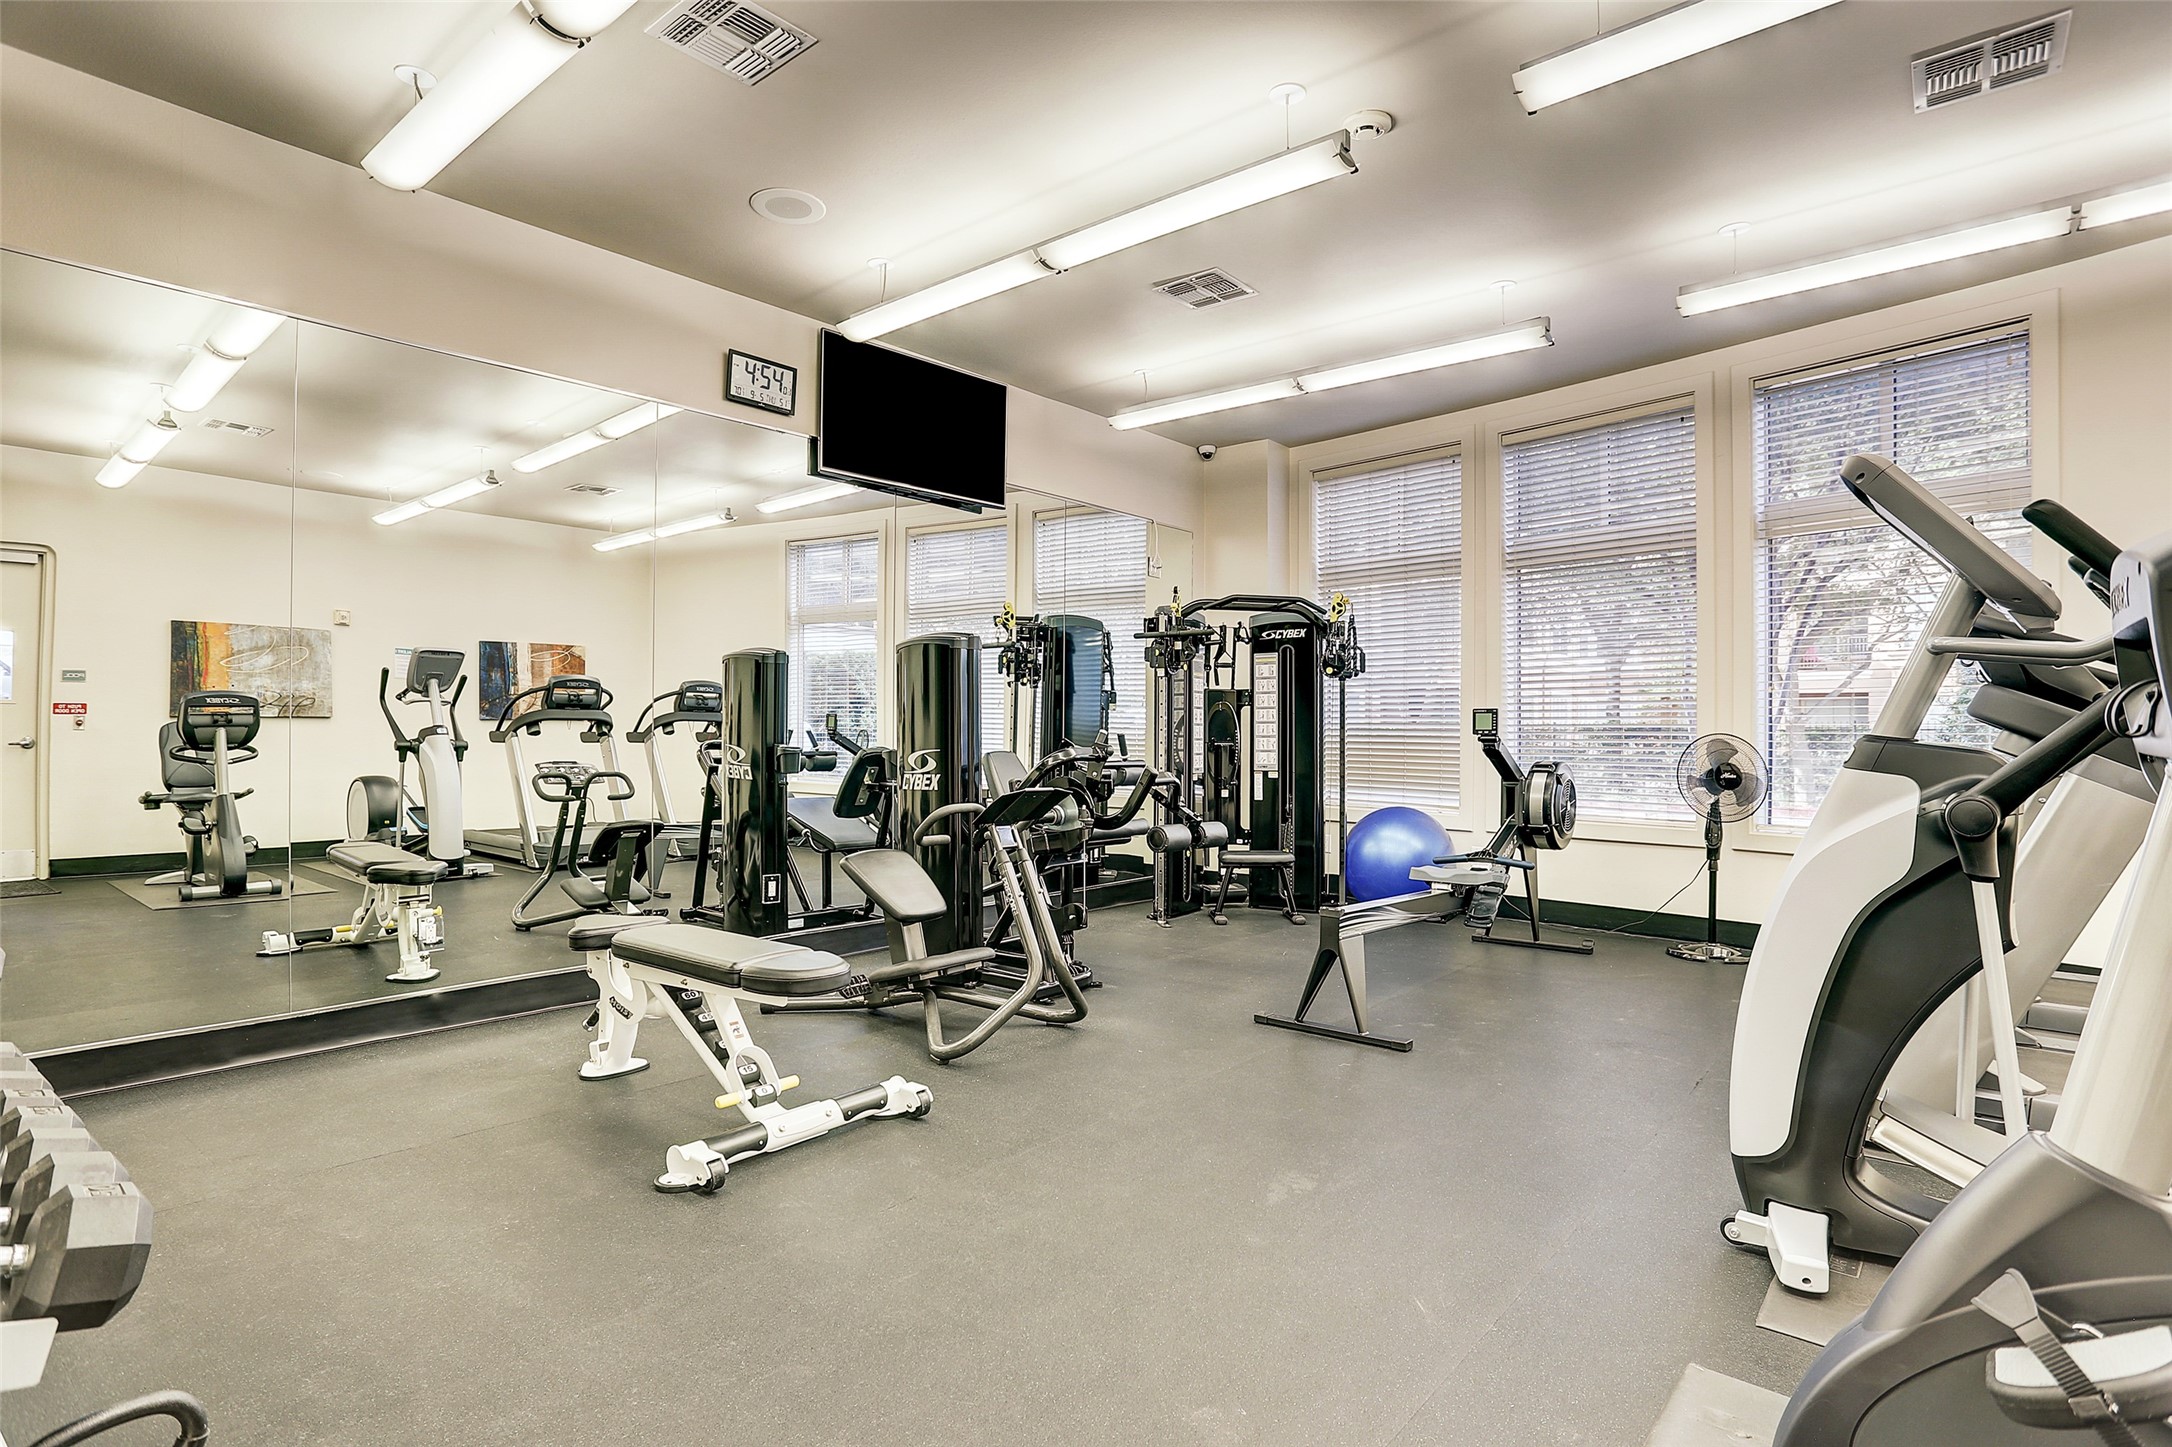 Fitness center located on the first floor.